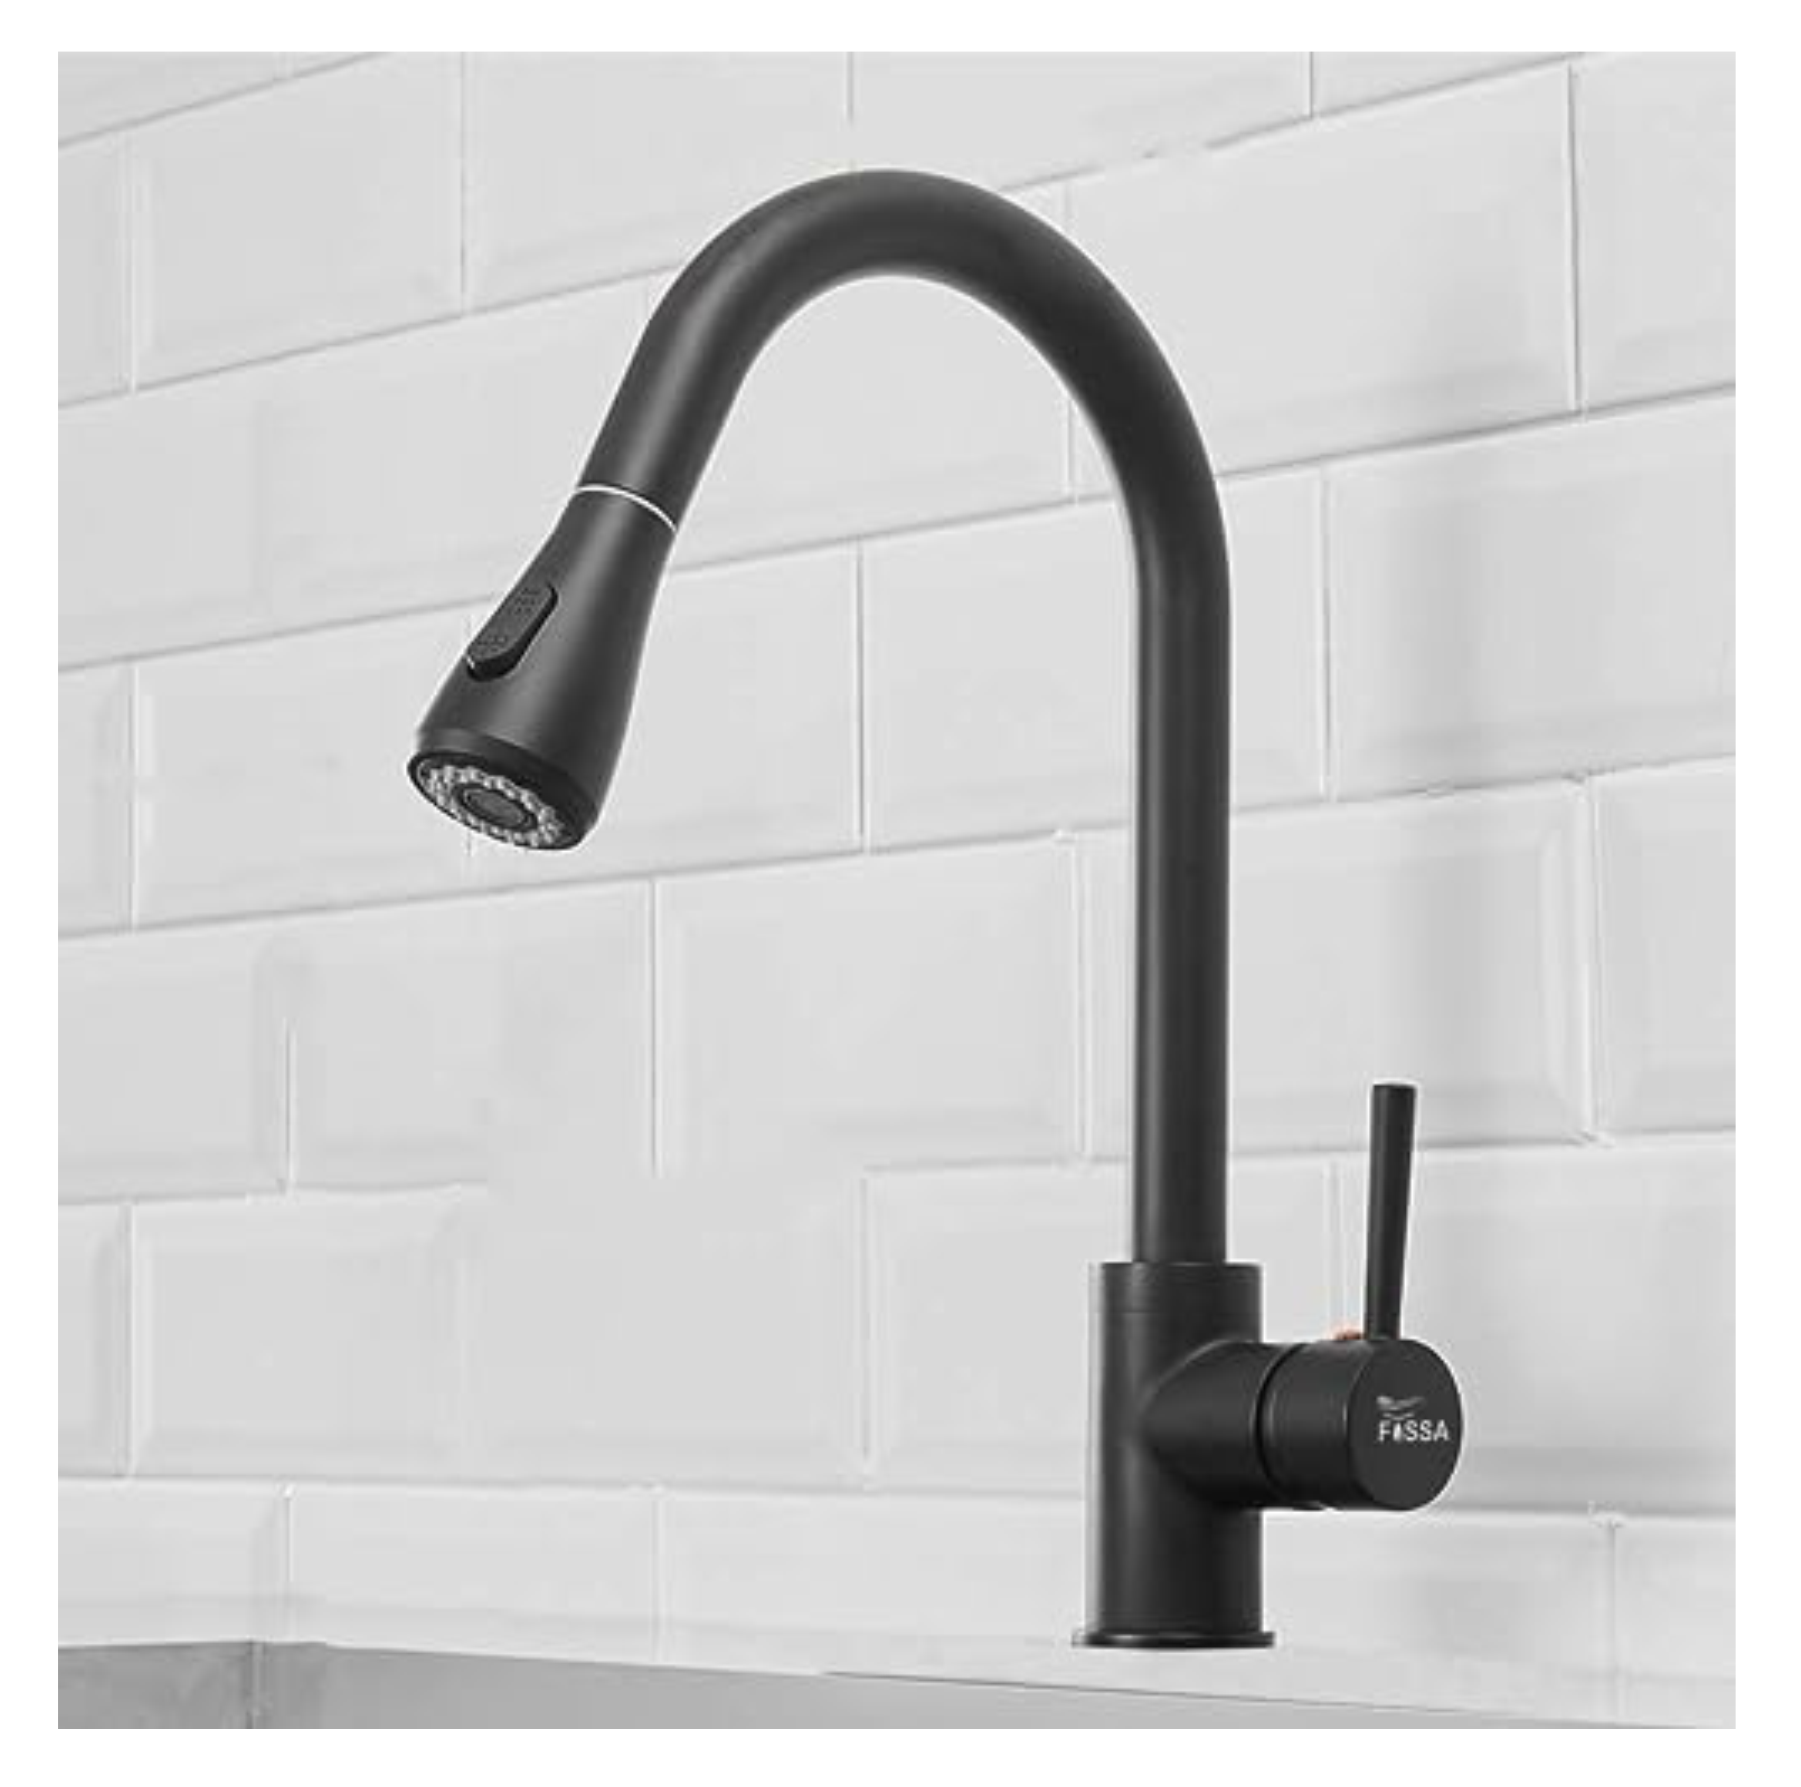 Fossa Kitchen Sink Mixer Tap with Pull Down Sprayer, Single Handle High Pull Out Kitchen Taps, Single Level Stainless Steel (Black) Fossa Home